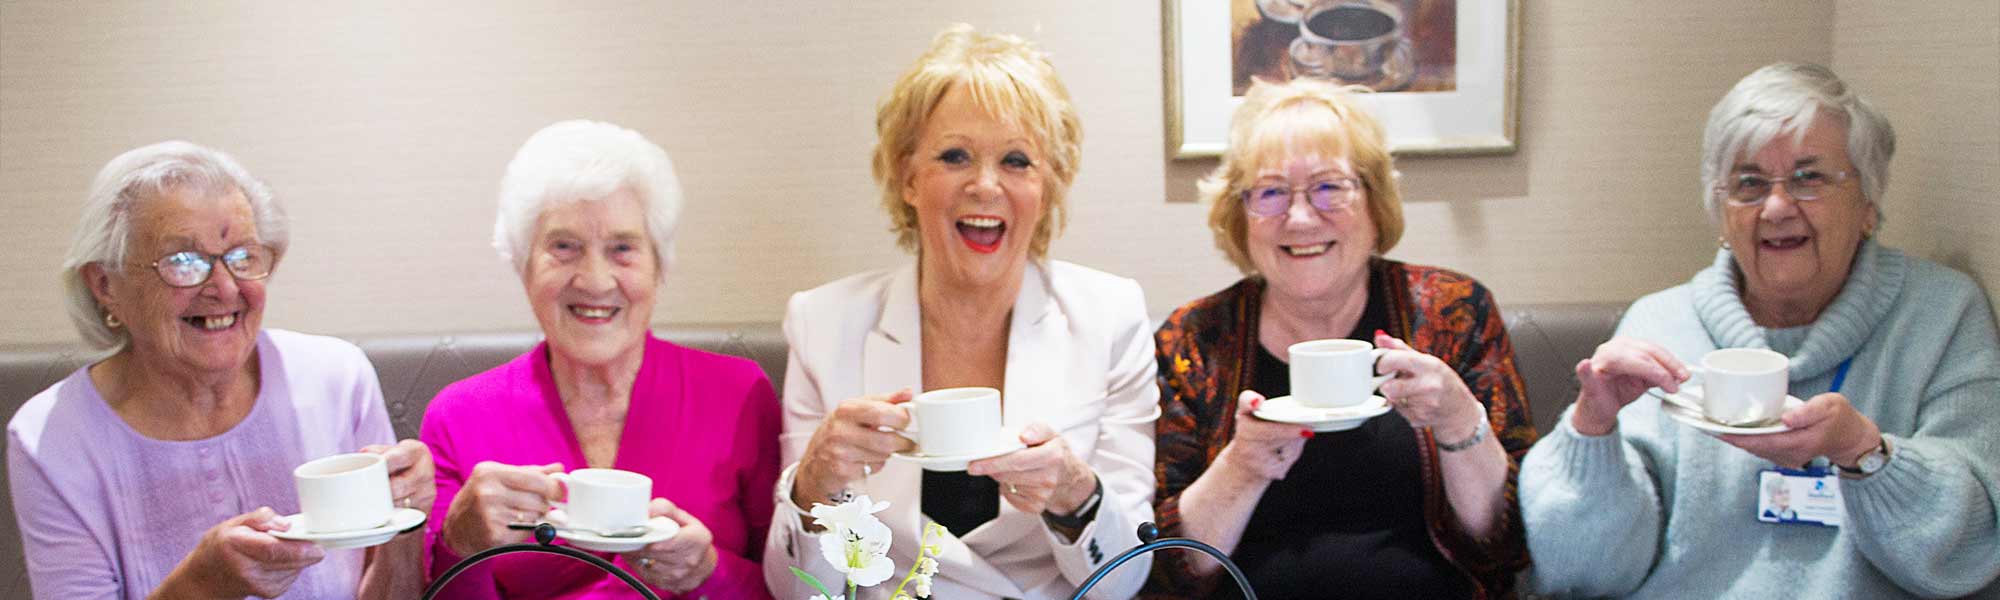 Sherrie Hewson visits Crispin Court Care Home tea resdients fun smiles women banner hero